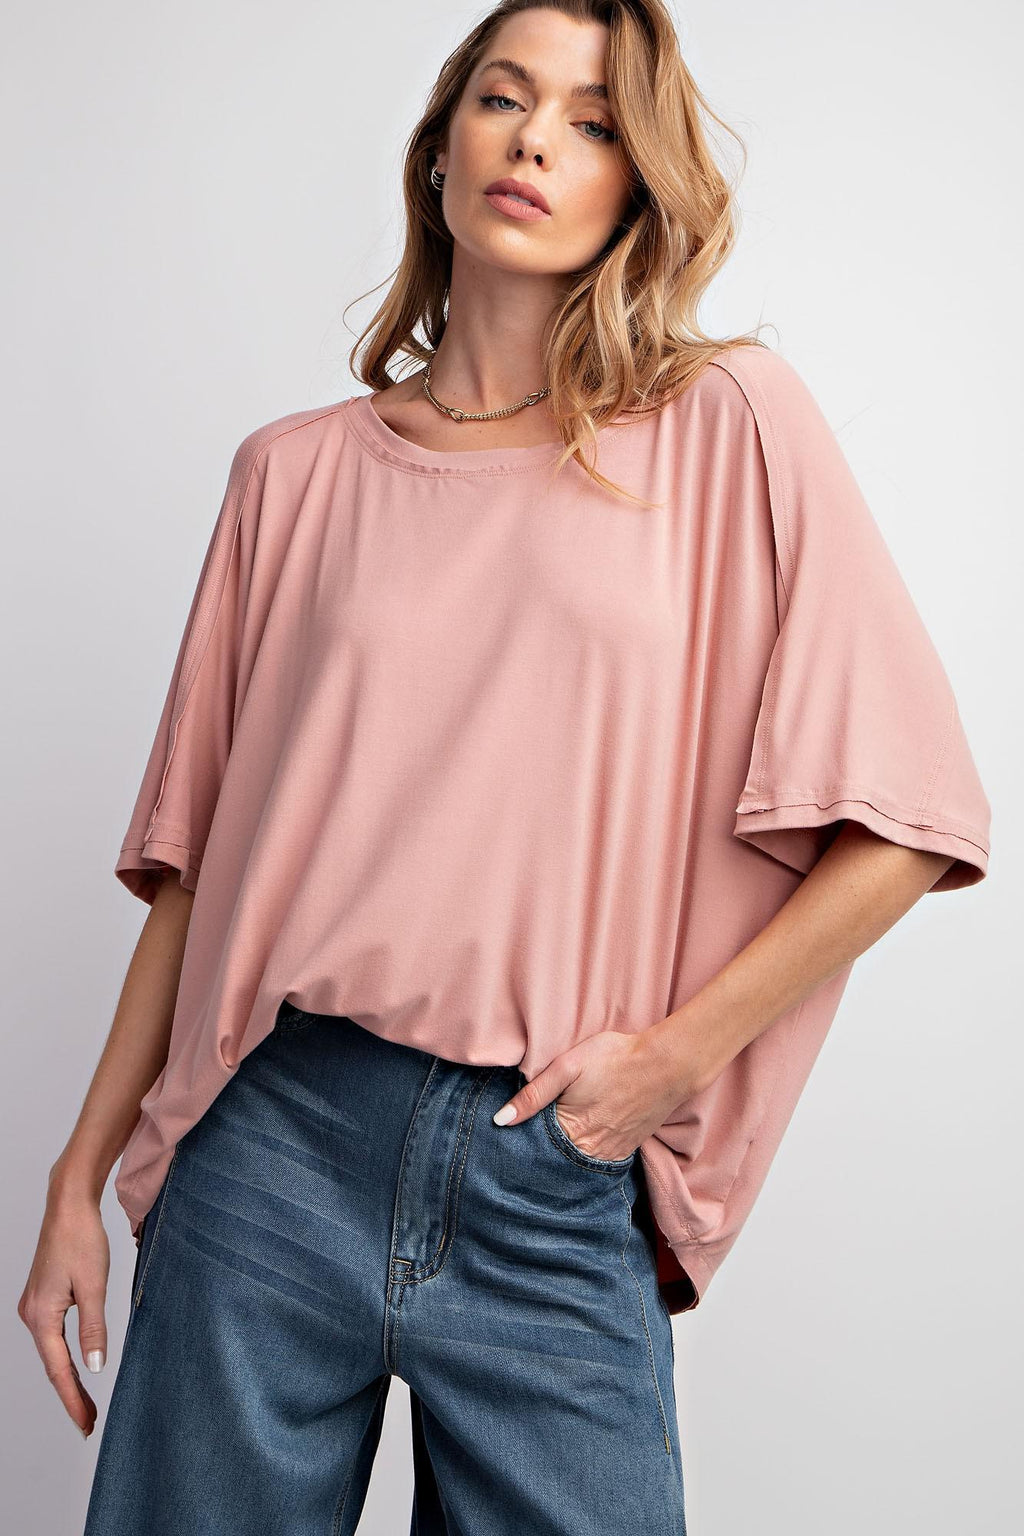 Faded Coral Washed Rayon Knit Tunic Top